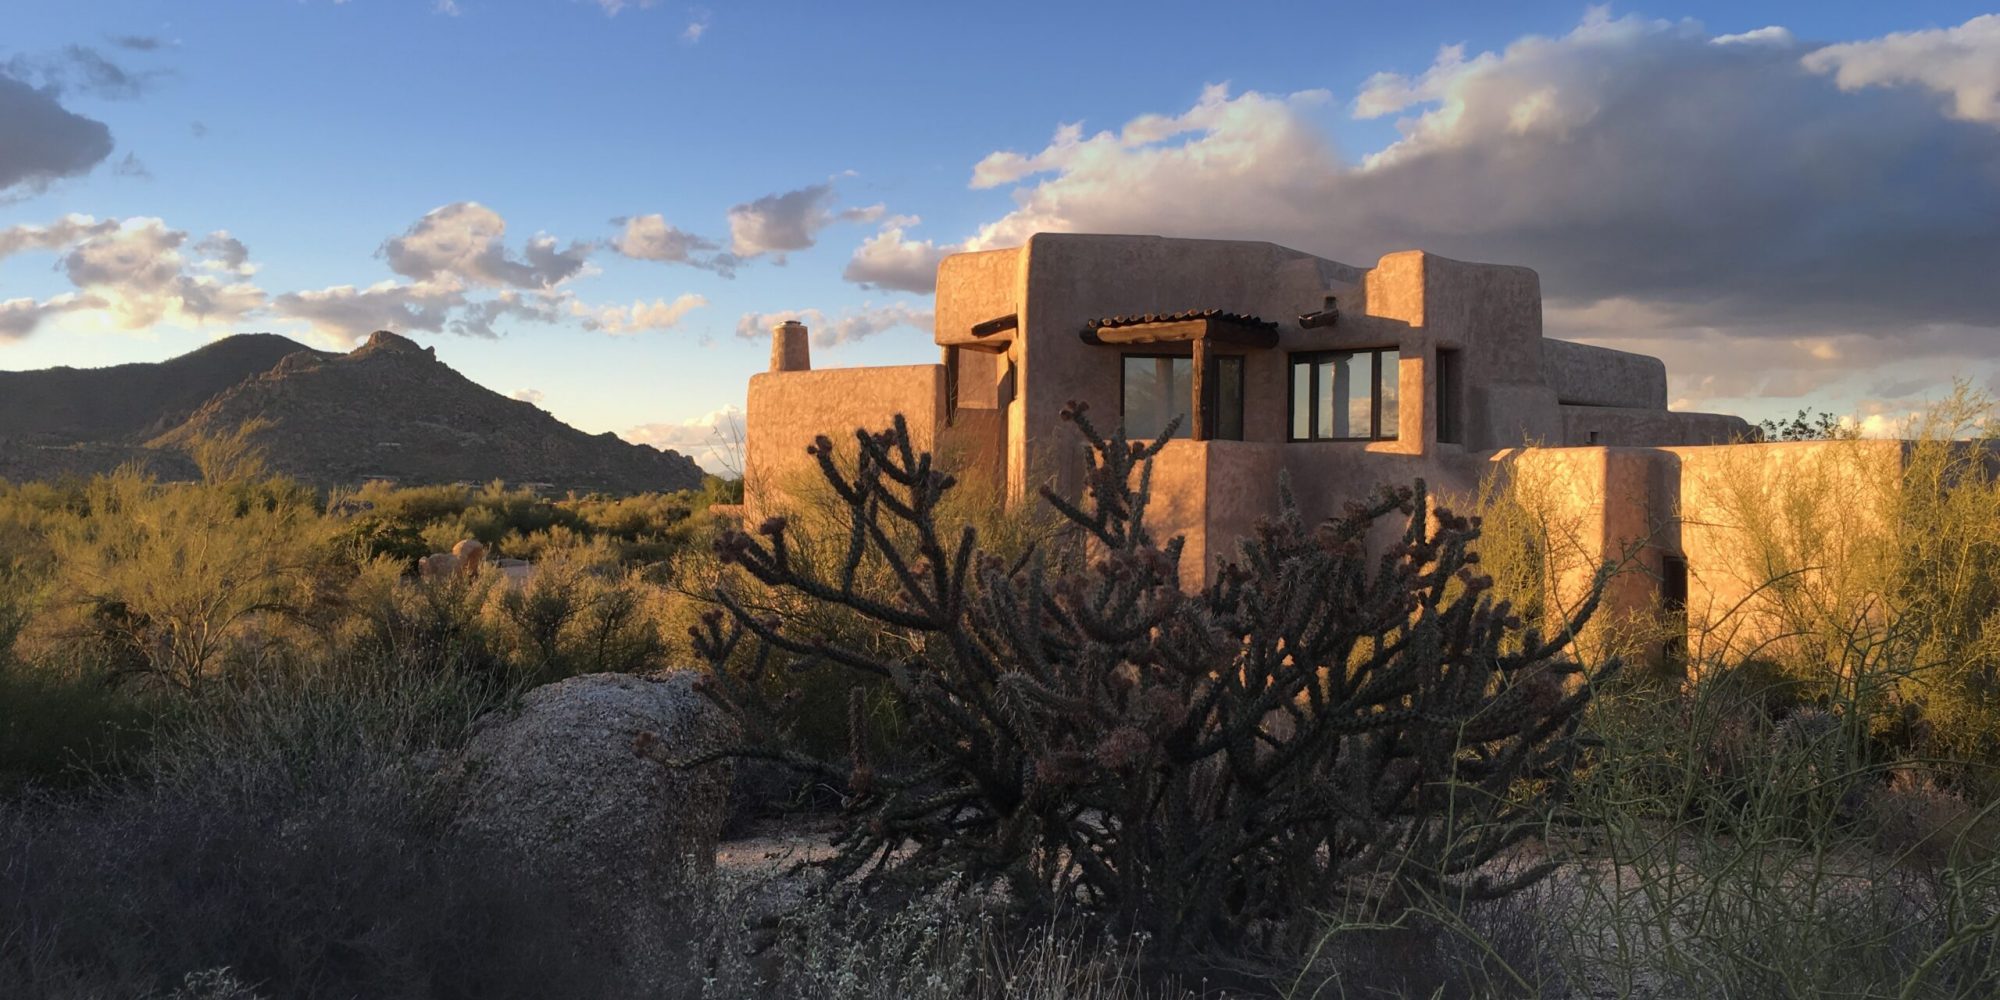 a rammed earth home in the desert